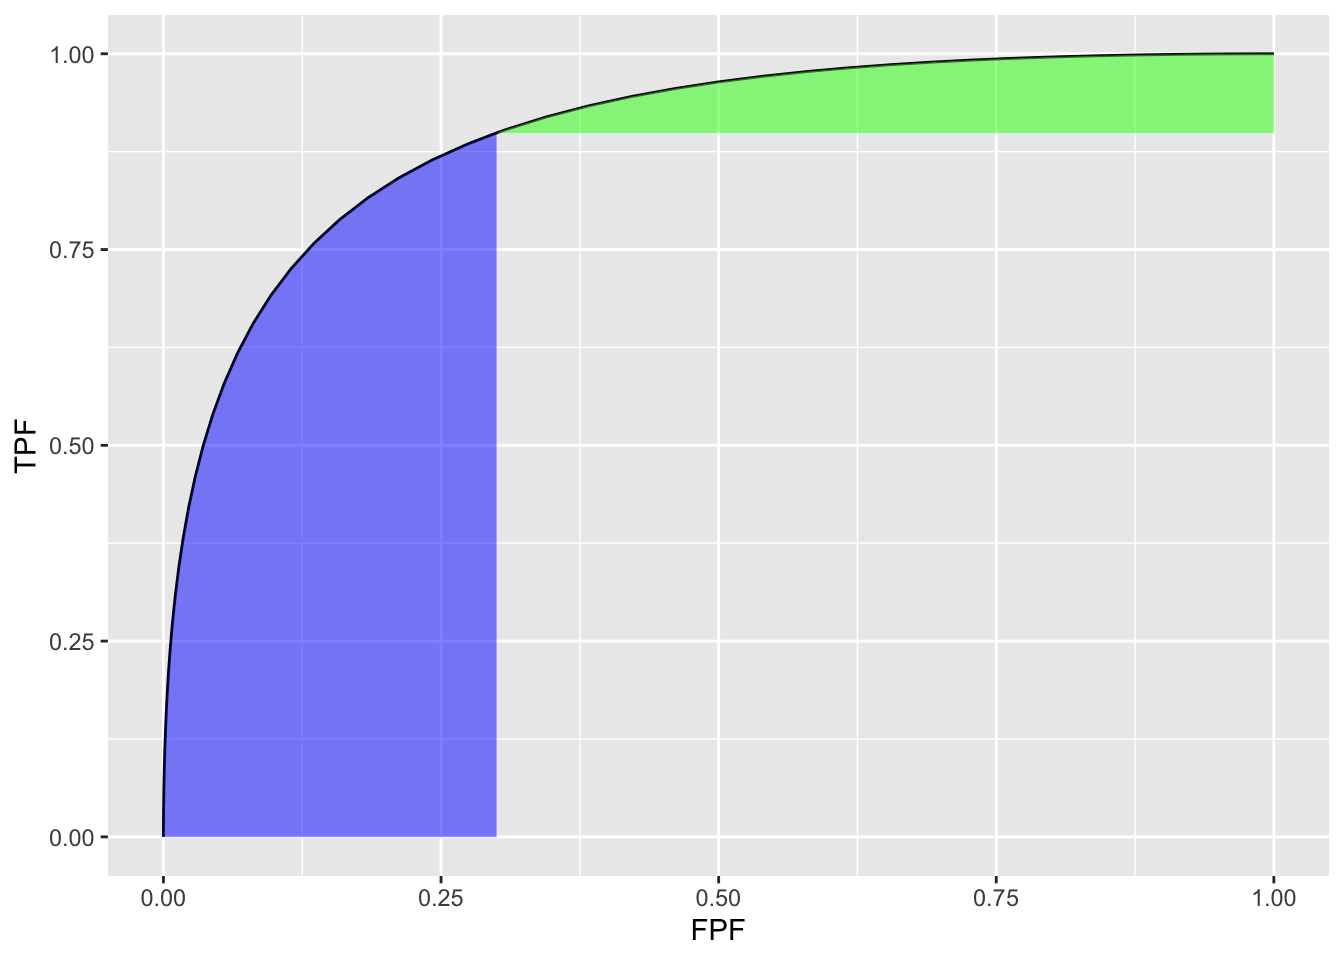 Un-normalized partial AUC measures: the blue shaded area is $A_c^{X}$, the partial area below the ROC; the green shaded area is $A_c^{Y}$ the partial area above the ROC. Parameters are $a = 1.8$, $b = 1$ and $c = 0.3$.